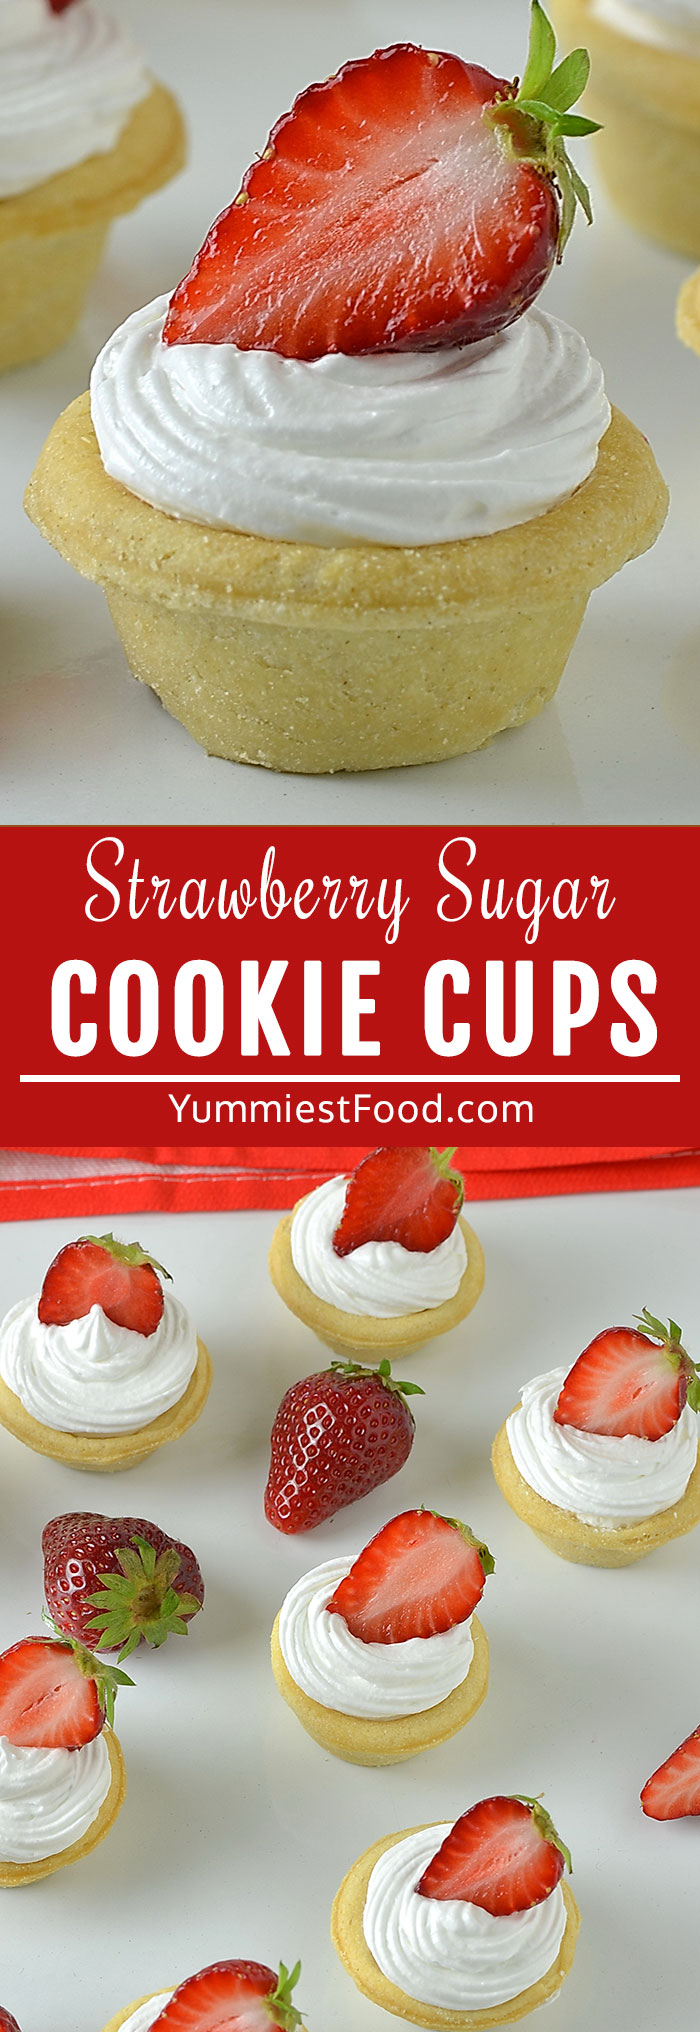 Strawberry Cheesecake Sugar Cookie Cups are an easy sugar cookie cup with creamy cheesecake filling, whipped cream and fresh strawberries! A bite-size sugar cookie cups perfect for parties and gatherings!